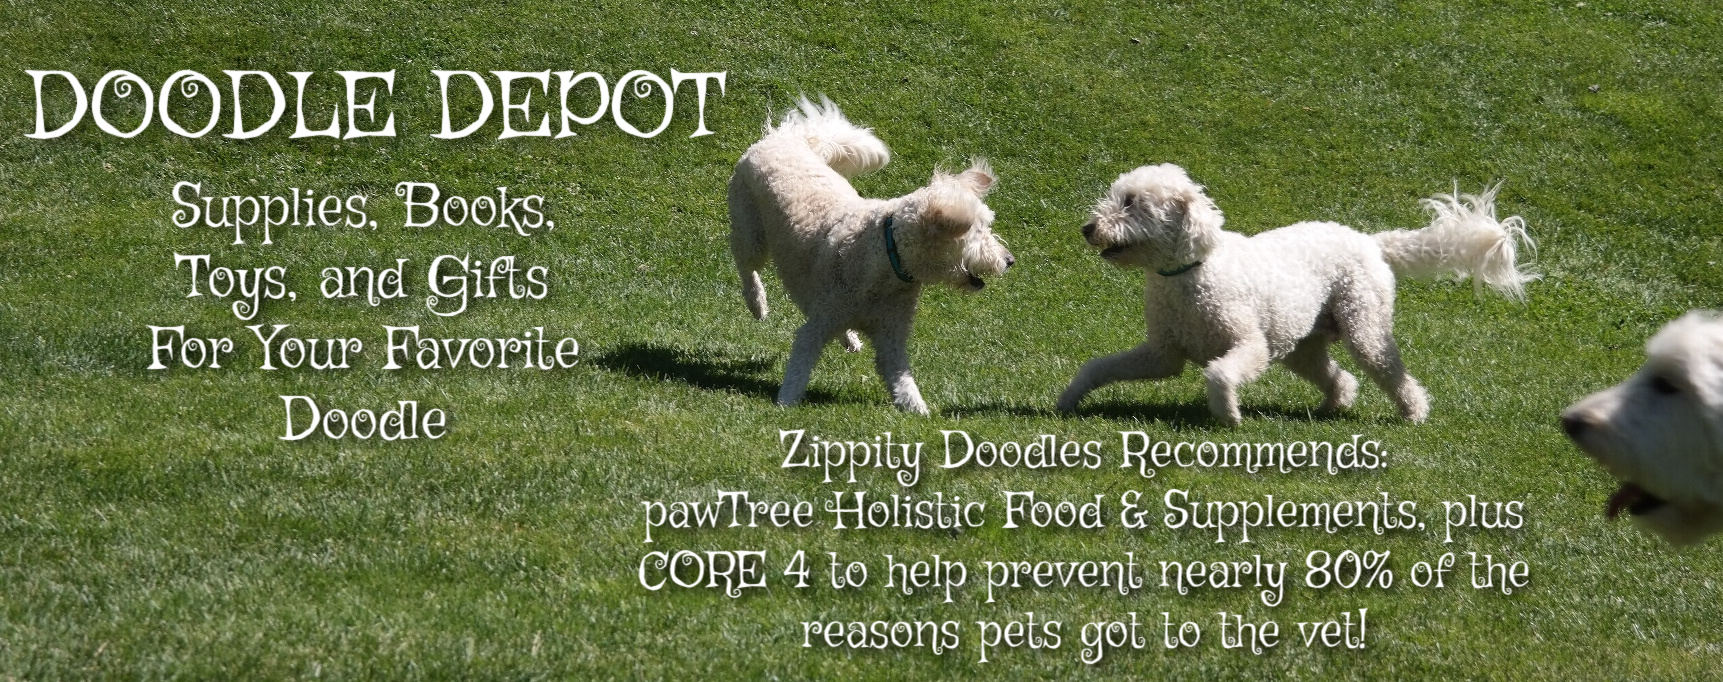 Doodle Depot - Supplies, Toys, & Gifts for Doodles